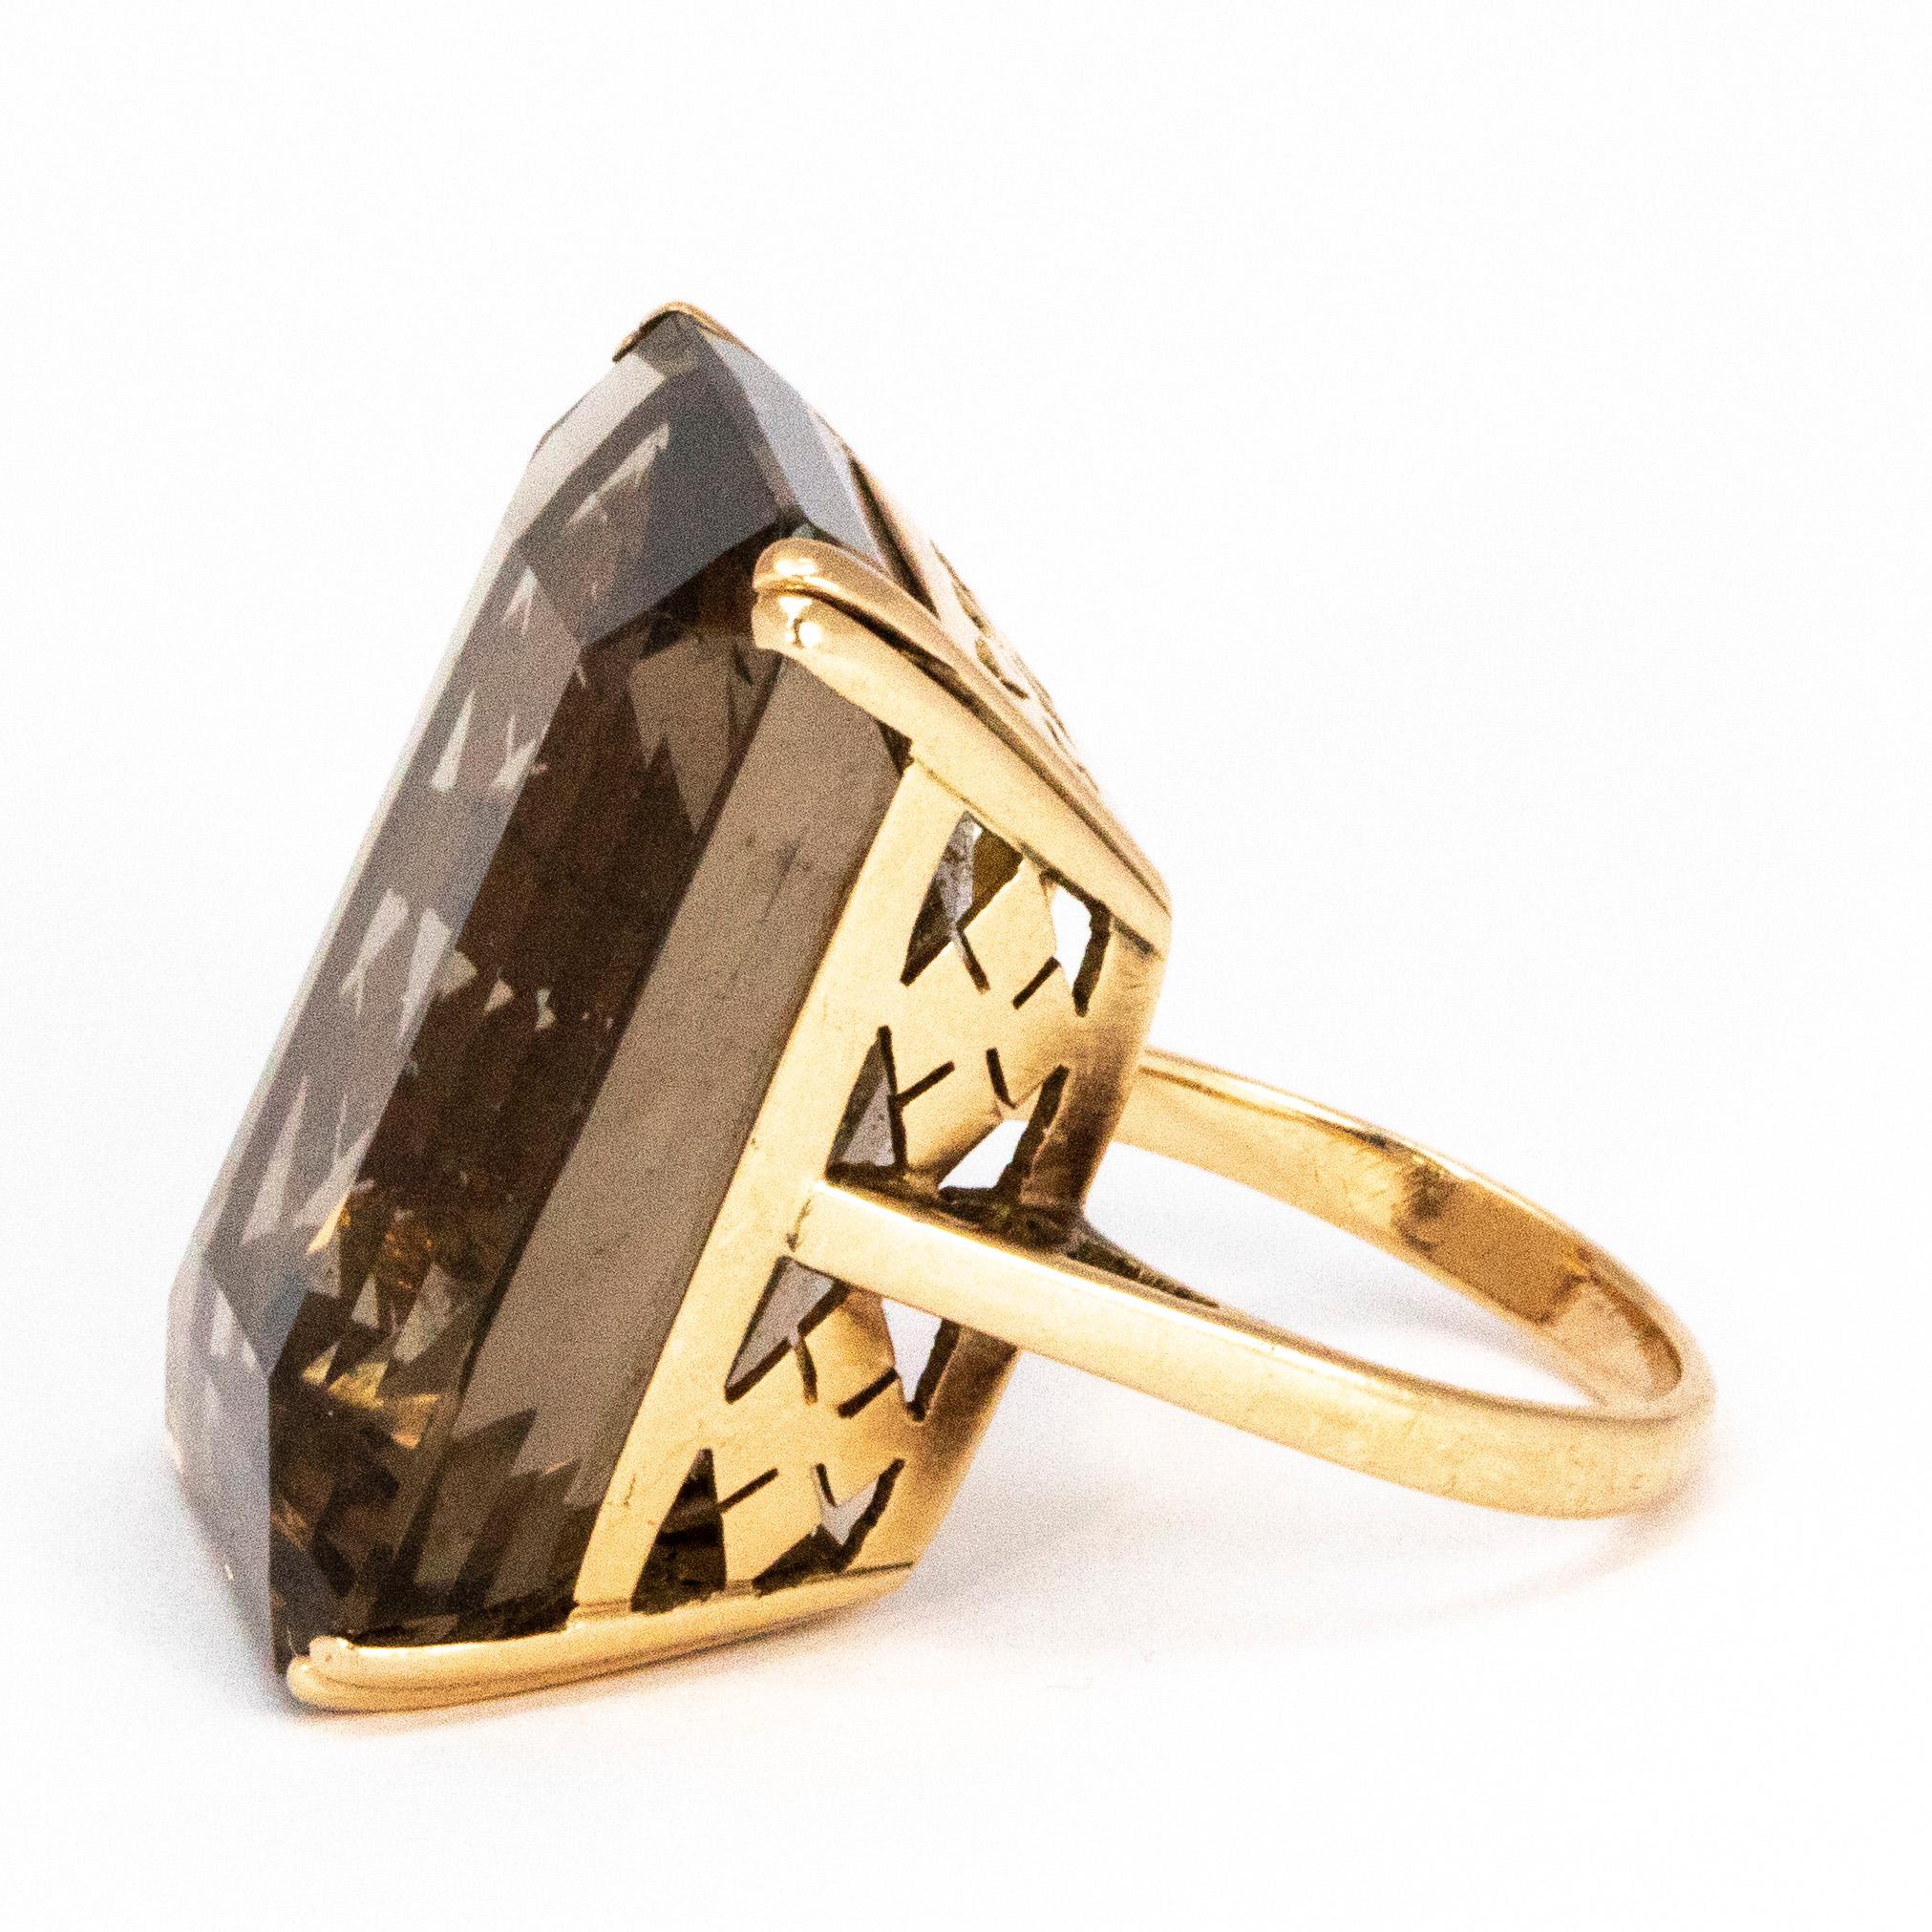 The stone at the centre of this gorgeous cocktail ring is very very large. It is a definite statement piece! The stone is emerald cut and is set in 9ct gold and is held with double claws at each corner. The underside of the setting is decorative